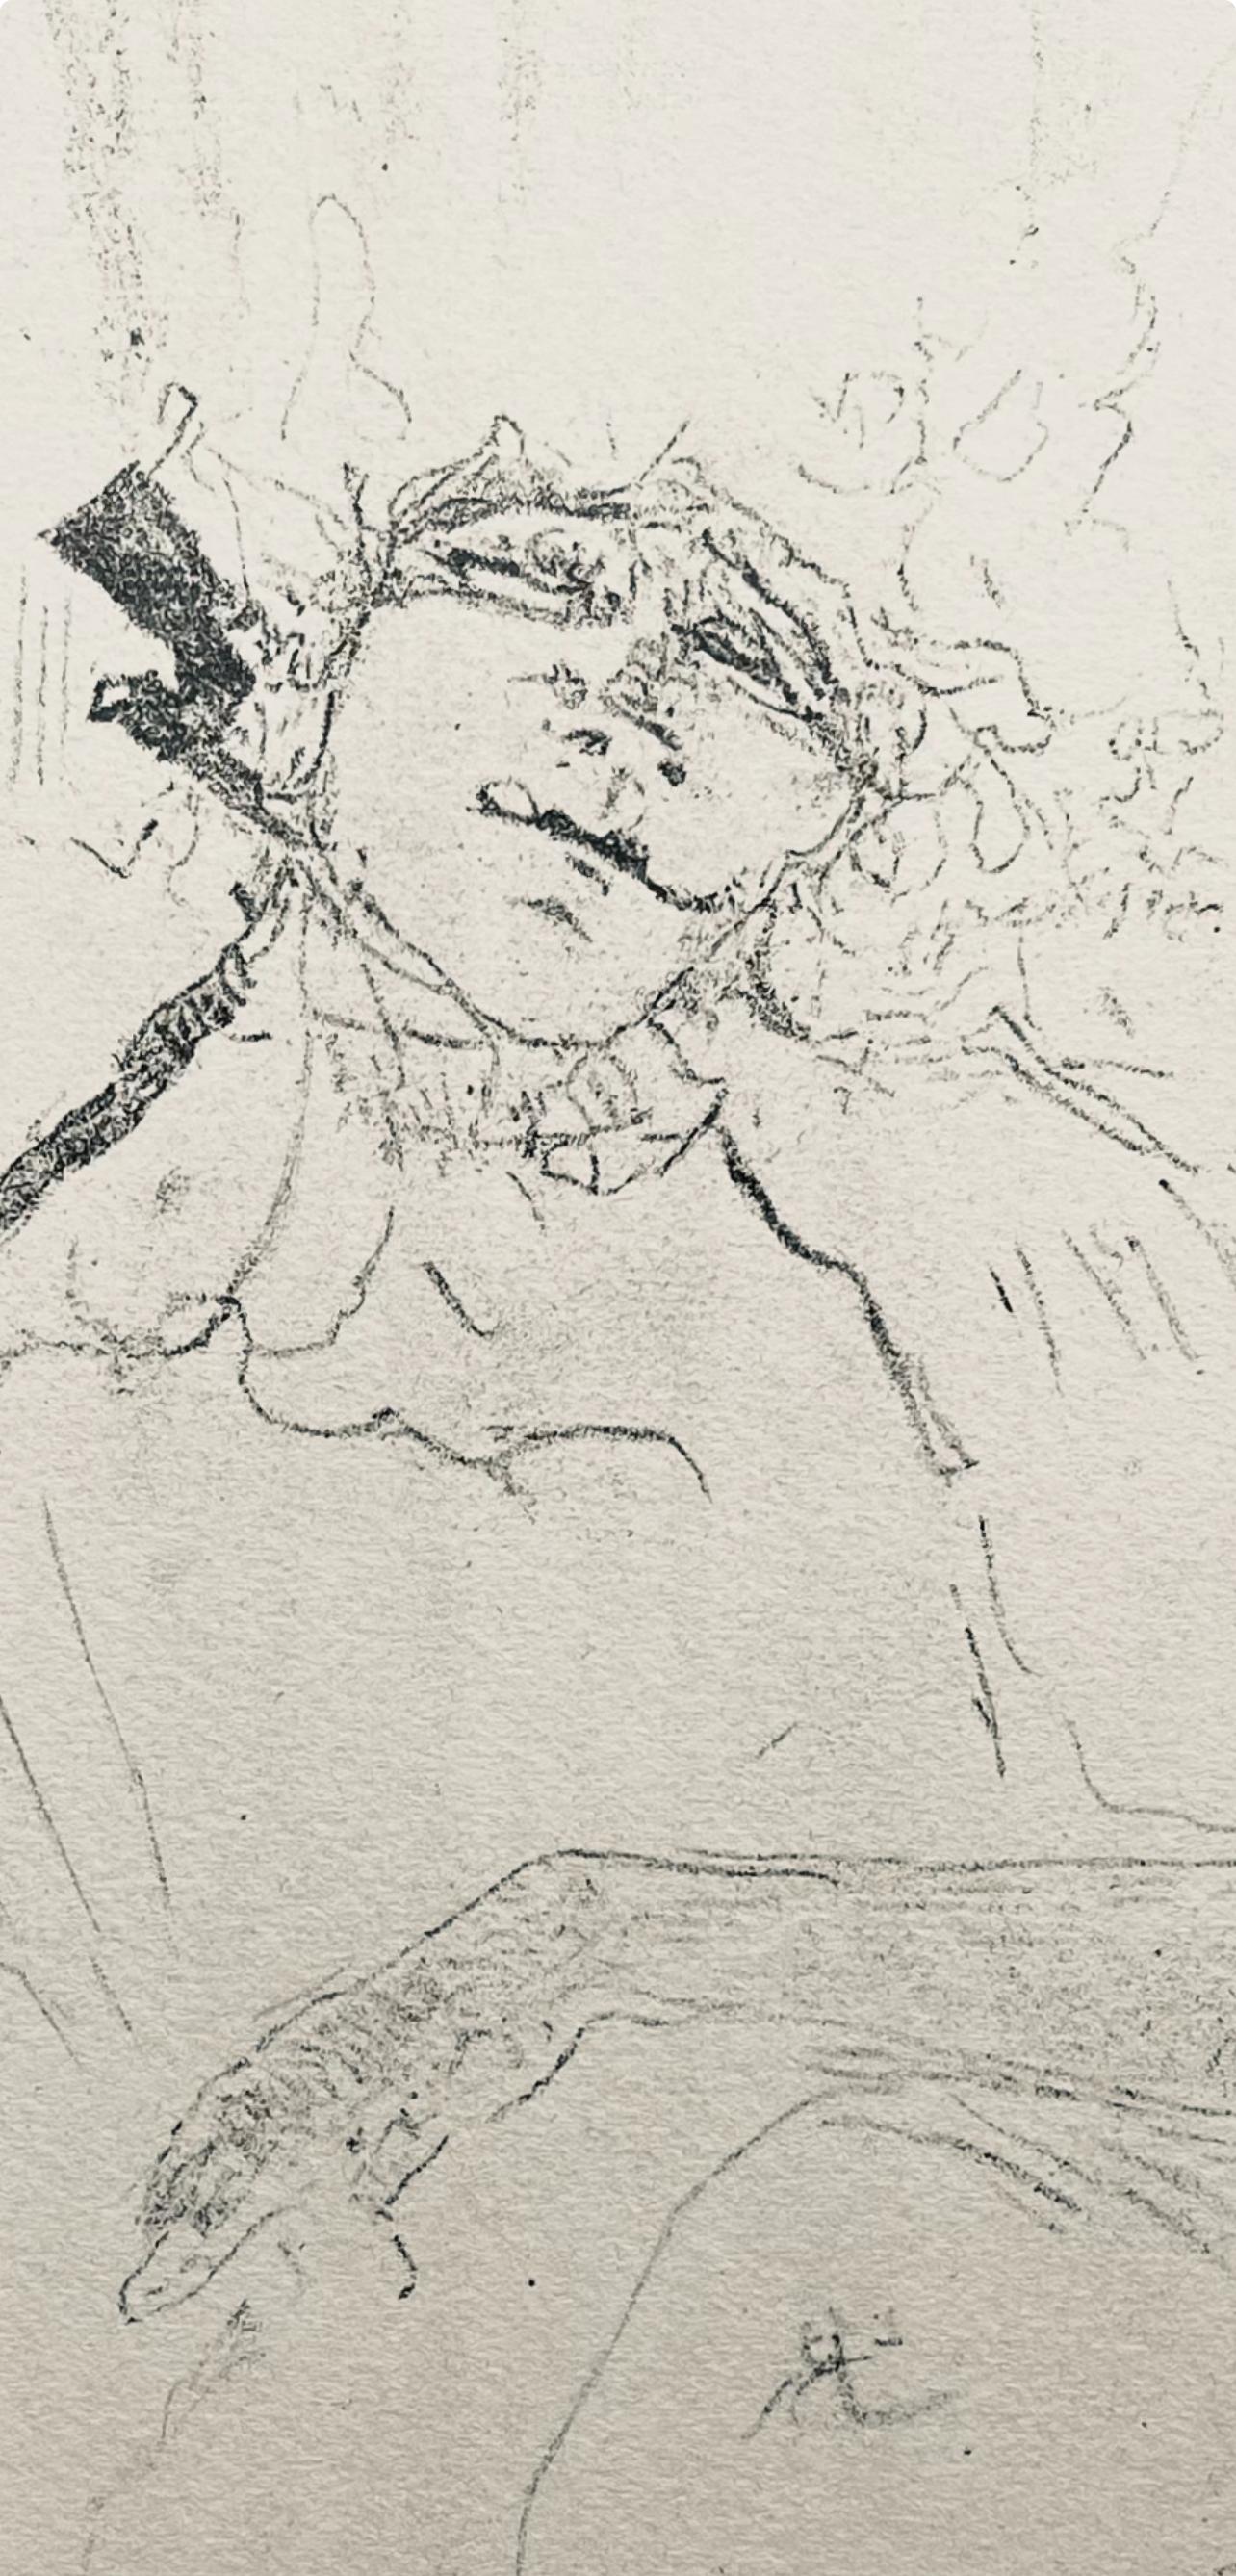 Lithograph and stencil on vélin Rives BFK paper.  Unsigned and unnumbered, as issued. Good Condition; never framed or matted. Notes: From the folio, Yvette Guilbert vue par Toulouse-Lautrec, 1950. Published by Librairie Au Pont des Arts, Paris;